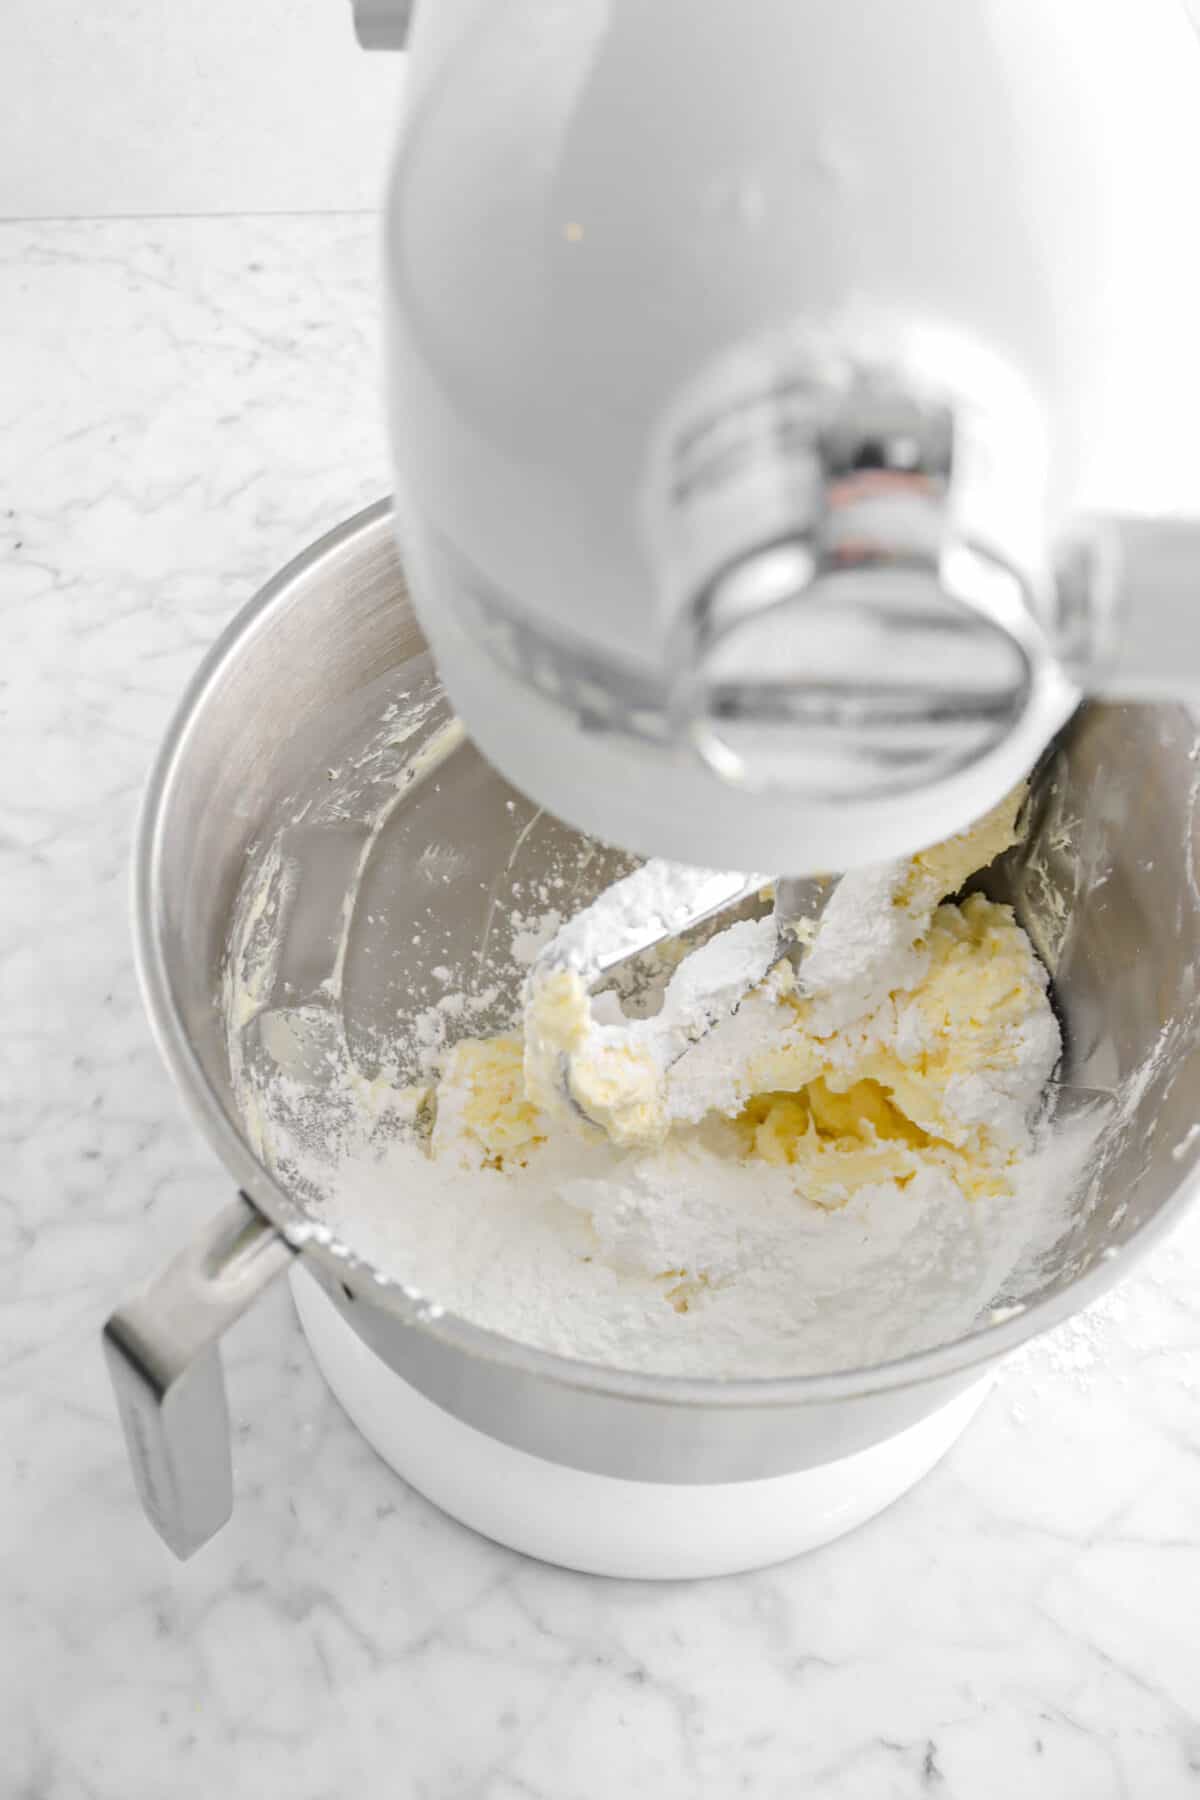 powdered sugar added to butter